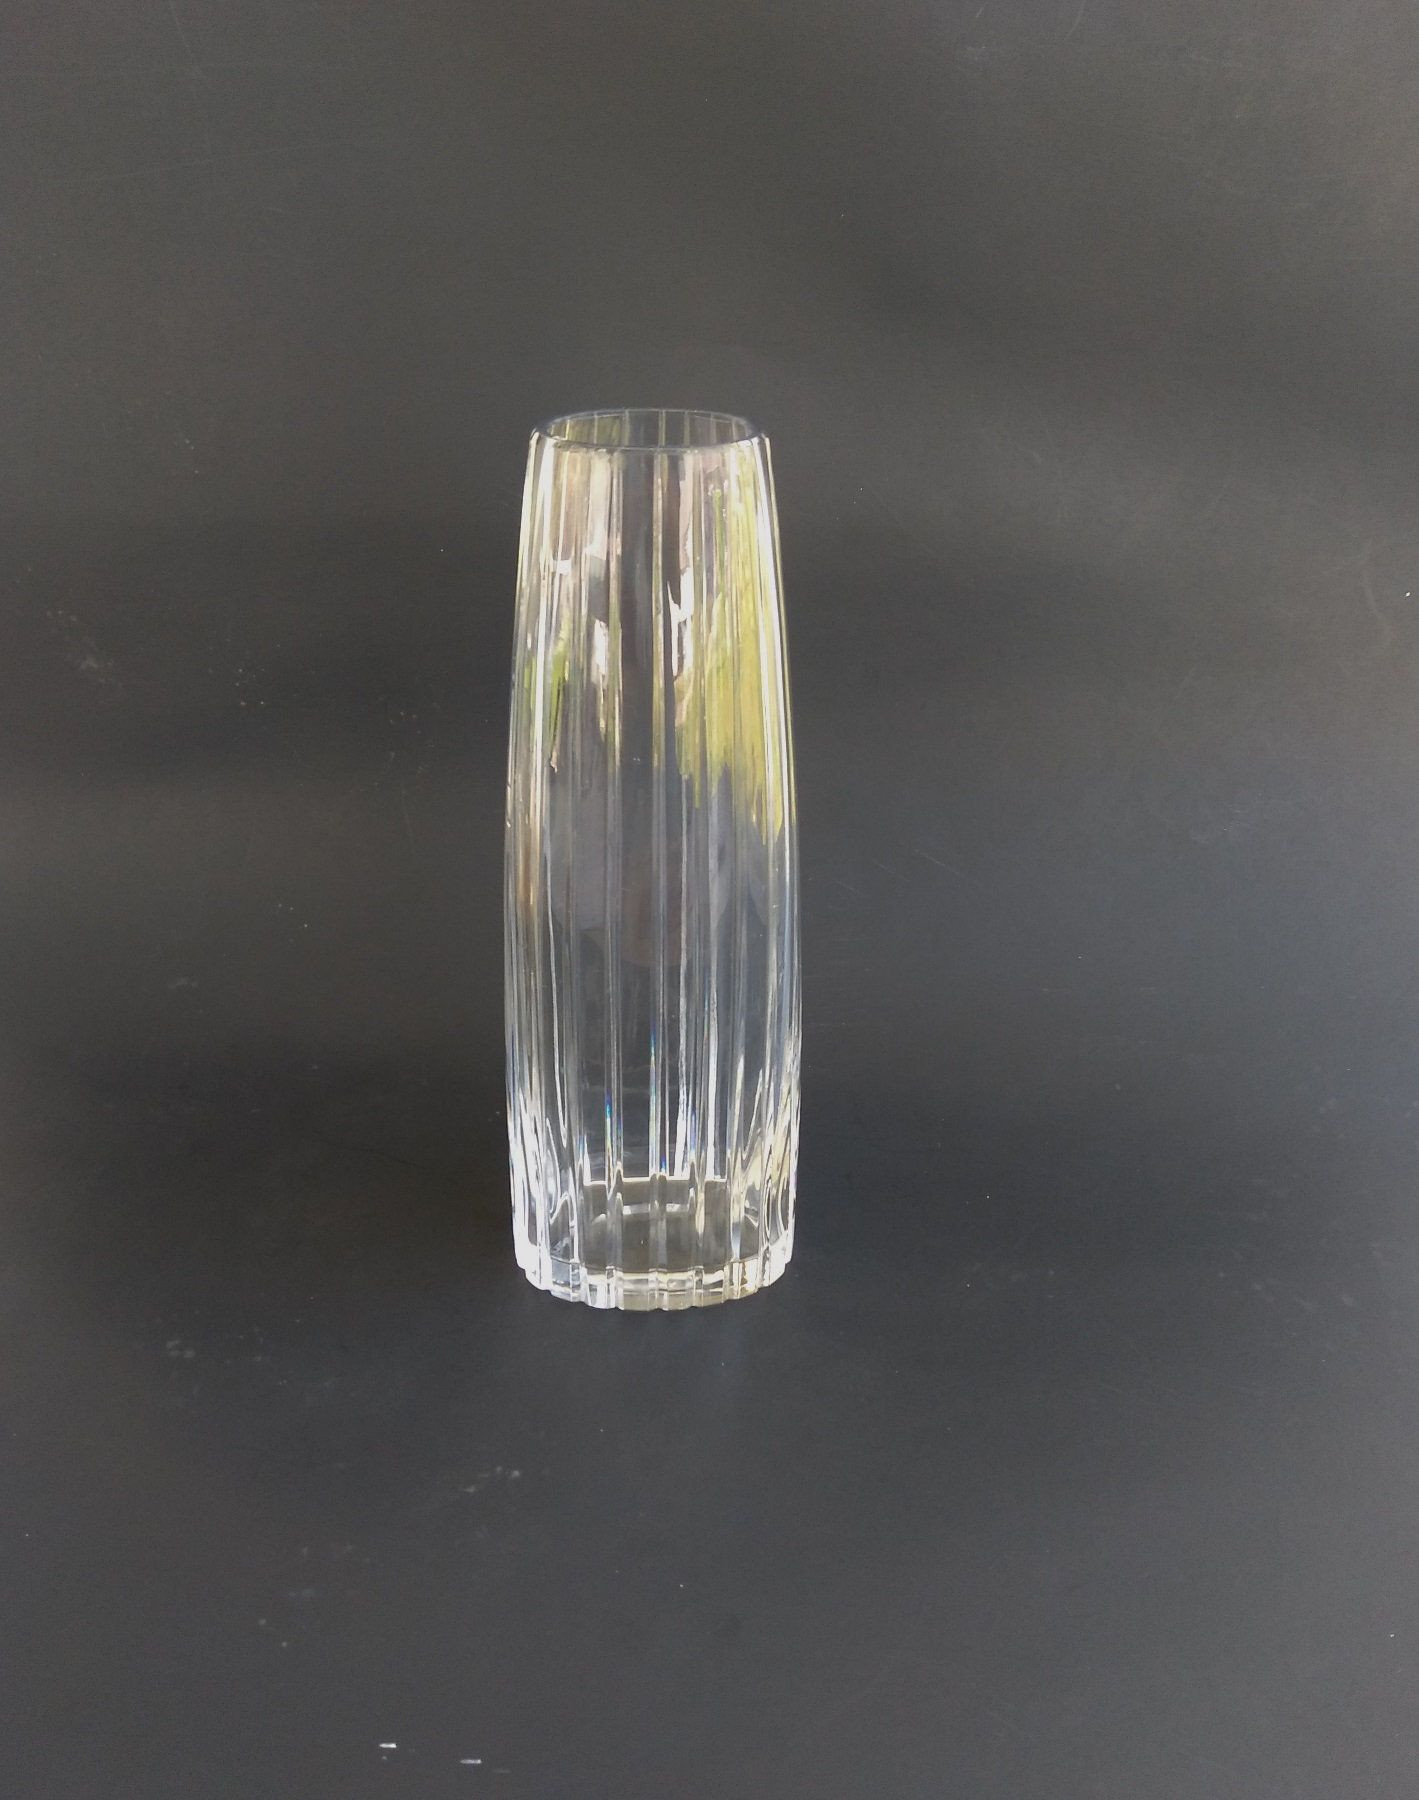 18 Ideal 6 Inch Crystal Vase 2024 free download 6 inch crystal vase of excited to share the latest addition to my etsy shop signed for excited to share the latest addition to my etsy shop signed atlantis fantasy cut